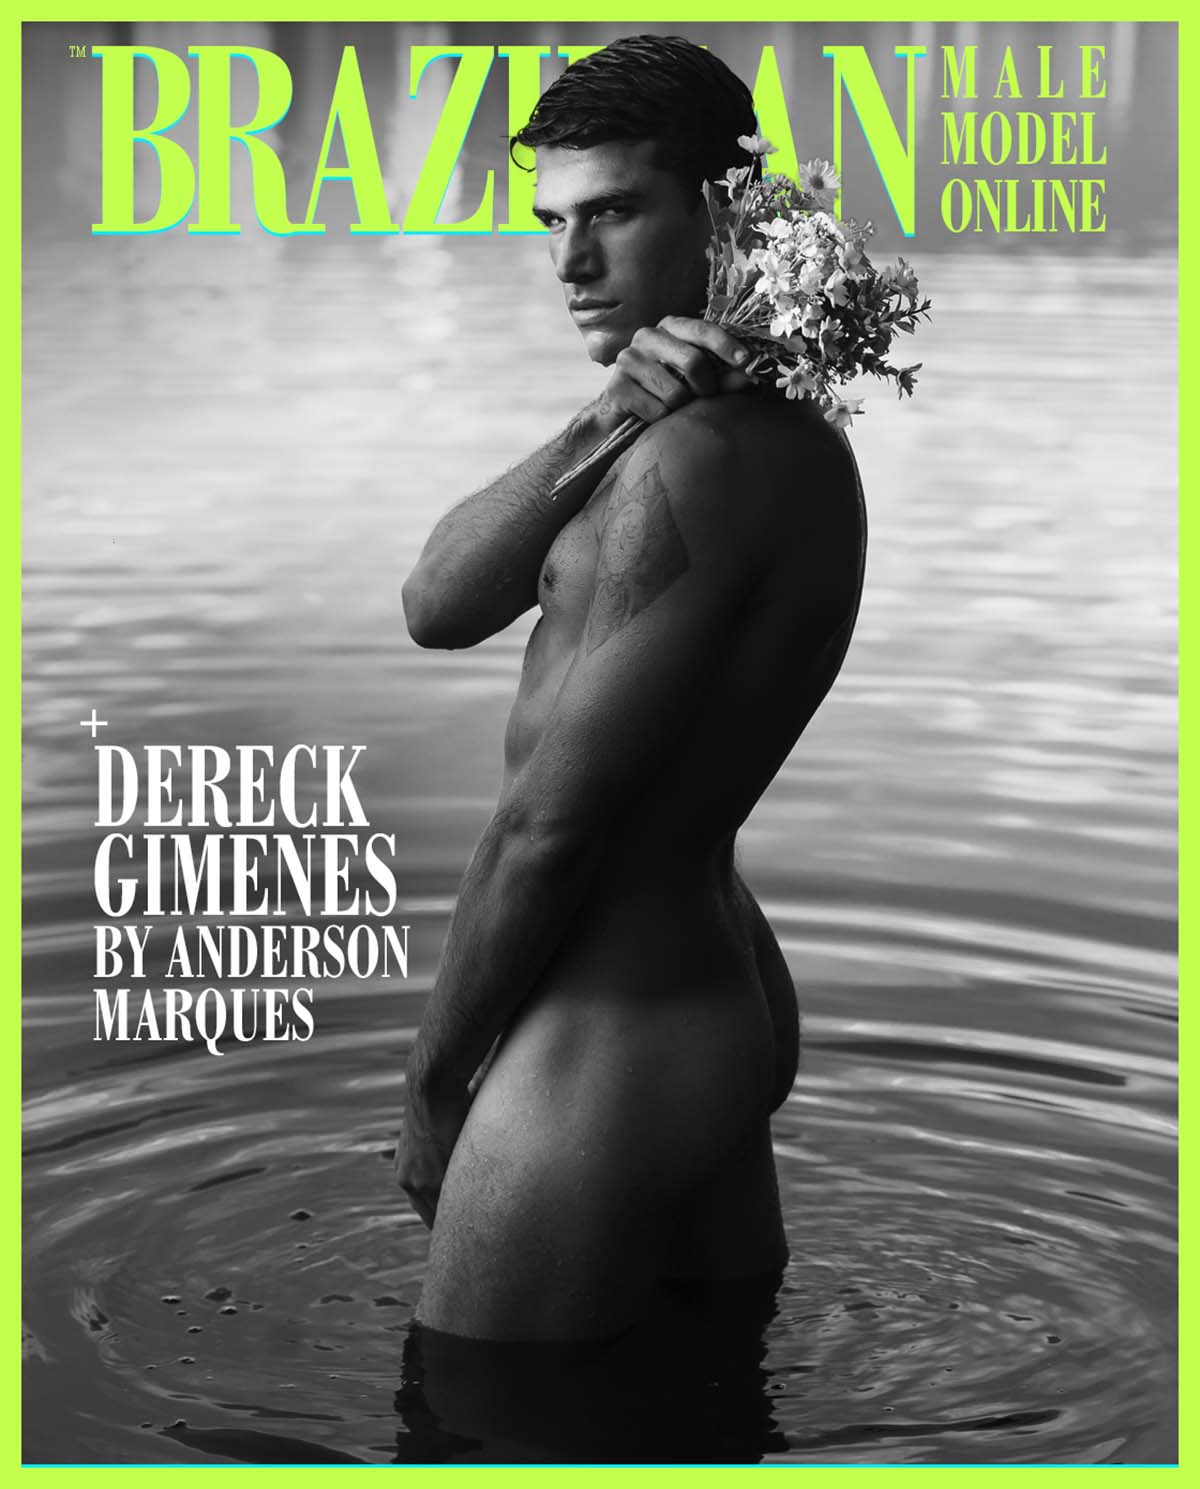 Dereck Gimenes by Anderson Marques